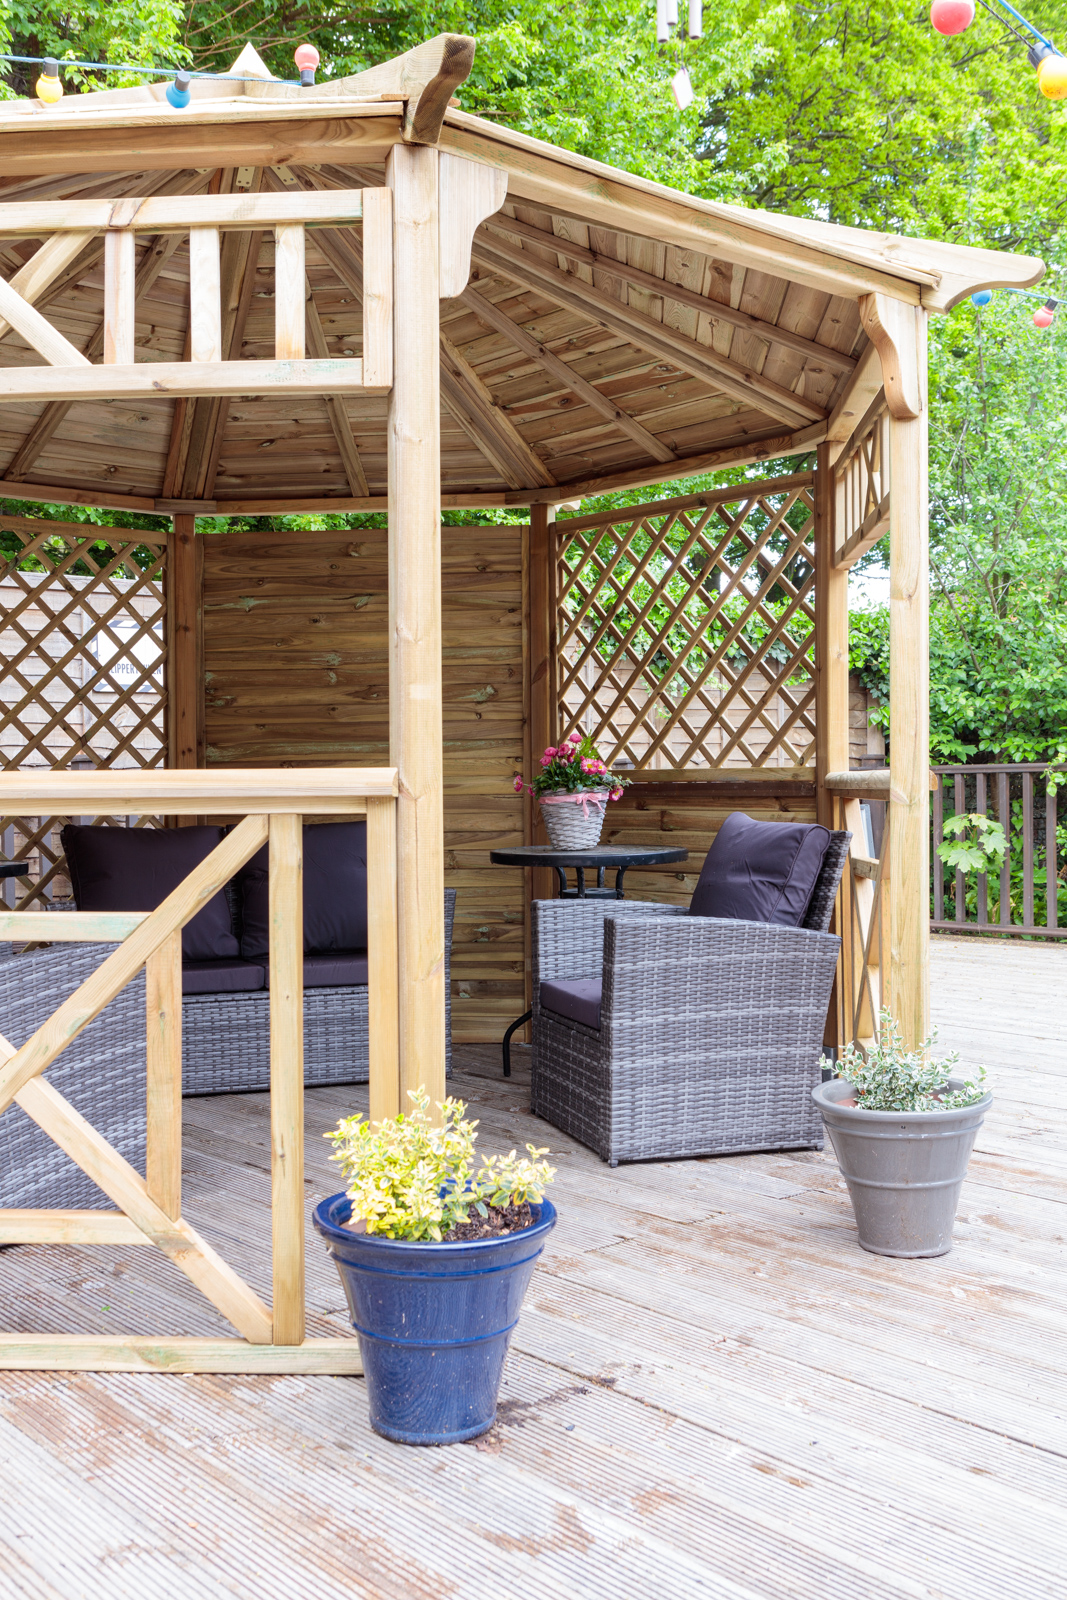 The secure garden offers a comfy space to relax